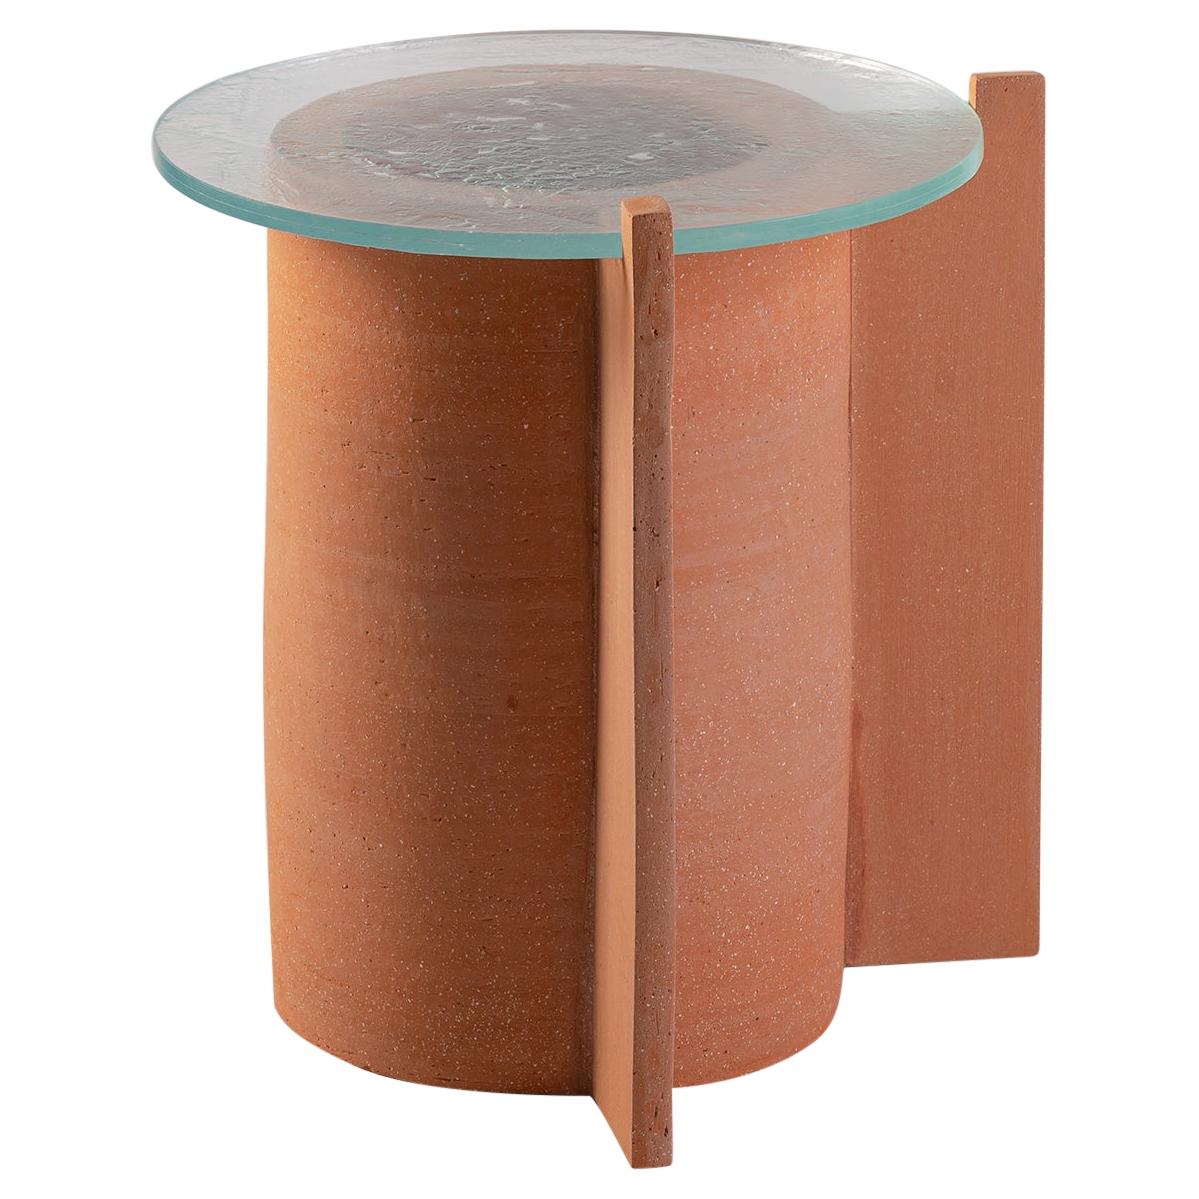 Terracotta and Glass Impronta Side Table by Peca, Small